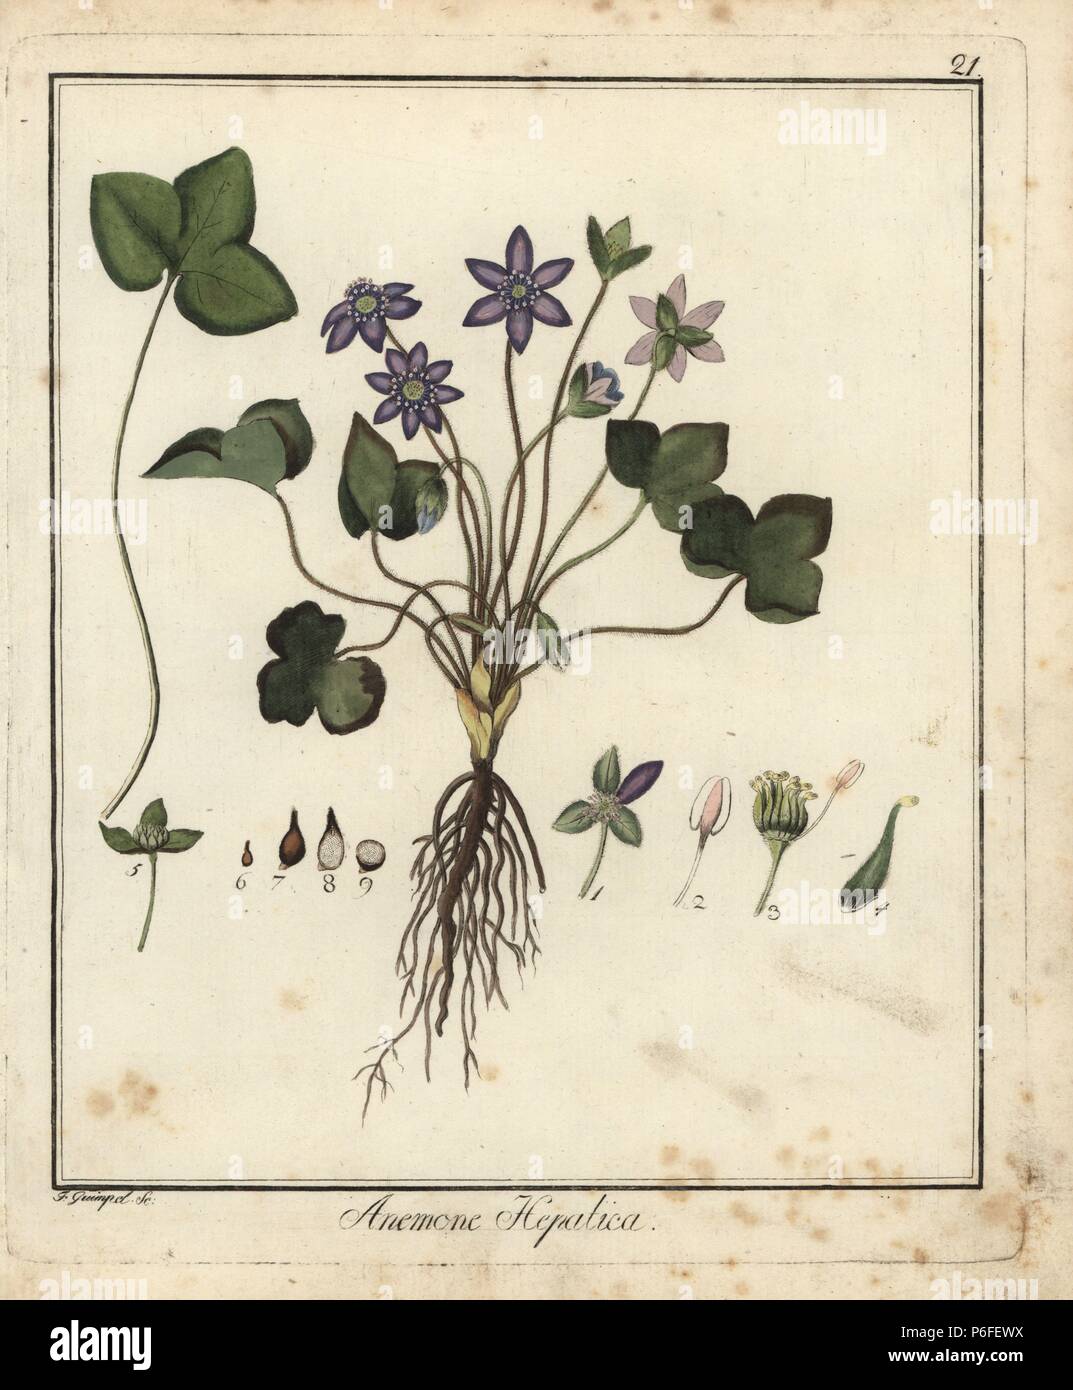 Common liverwort, Anemone hepatica. Handcoloured copperplate engraving by F. Guimpel from Dr. Friedrich Gottlob Hayne's Medical Botany, Berlin, 1822. Hayne (1763-1832) was a German botanist, apothecary and professor of pharmaceutical botany at Berlin University. Stock Photo